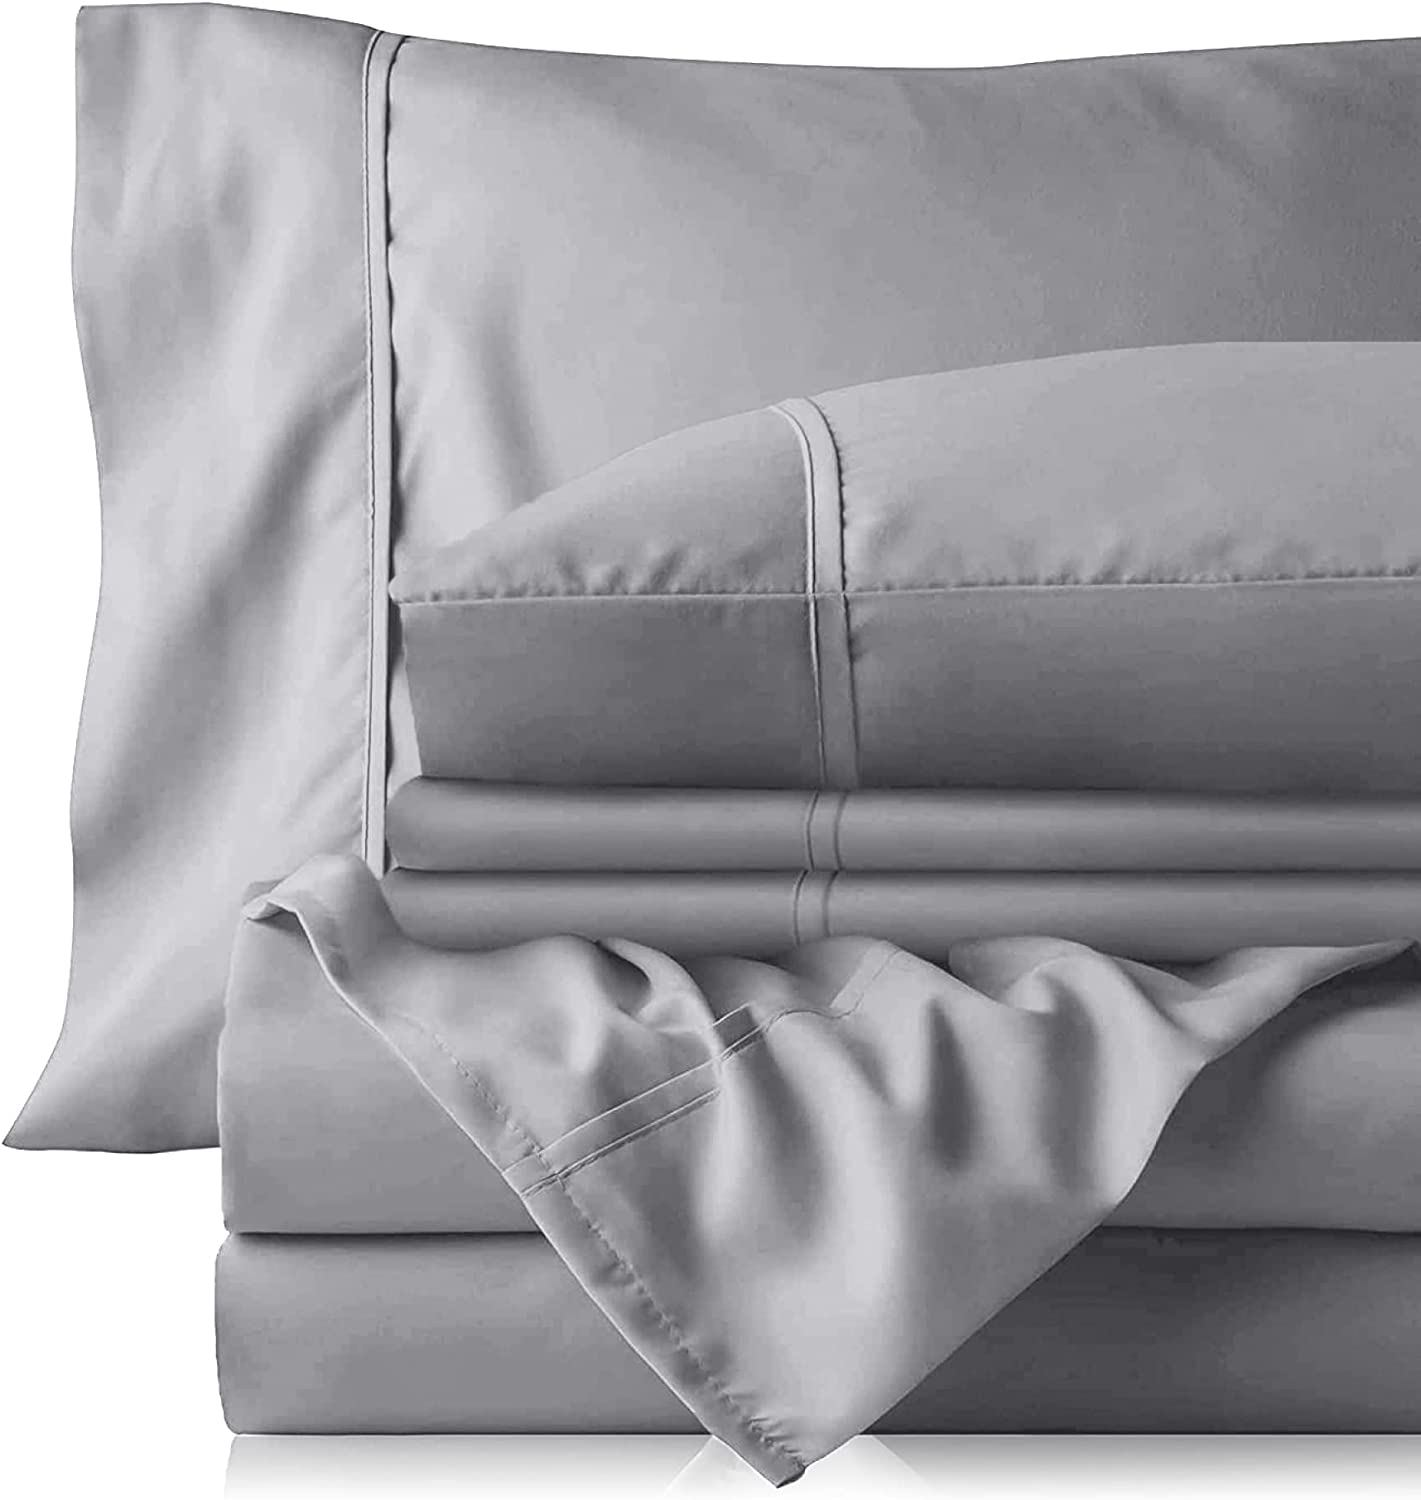 Stony Edge Bed Sheets for All Sized Beds, 300 Thread Count, 100% Cotton, Extra Long Staple Yarns, Set of 4 Sateen Weave Light Gray Bed Sheets & Pillowcases